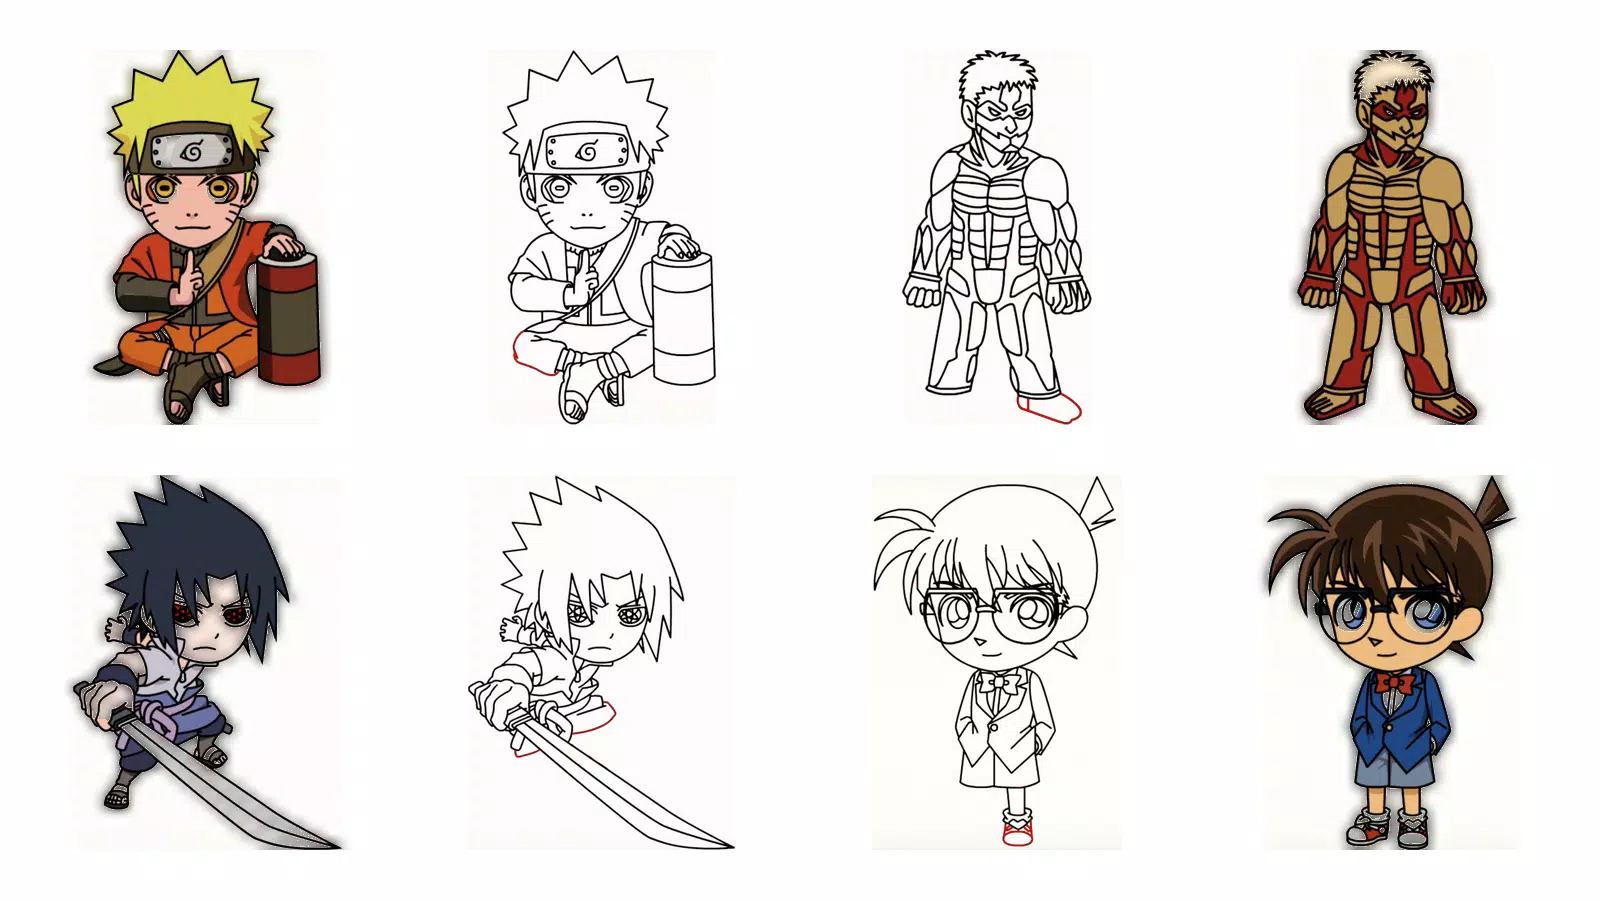 How to Draw a Cute Chibi Naruto Easy Step by Step Drawing Tutorial